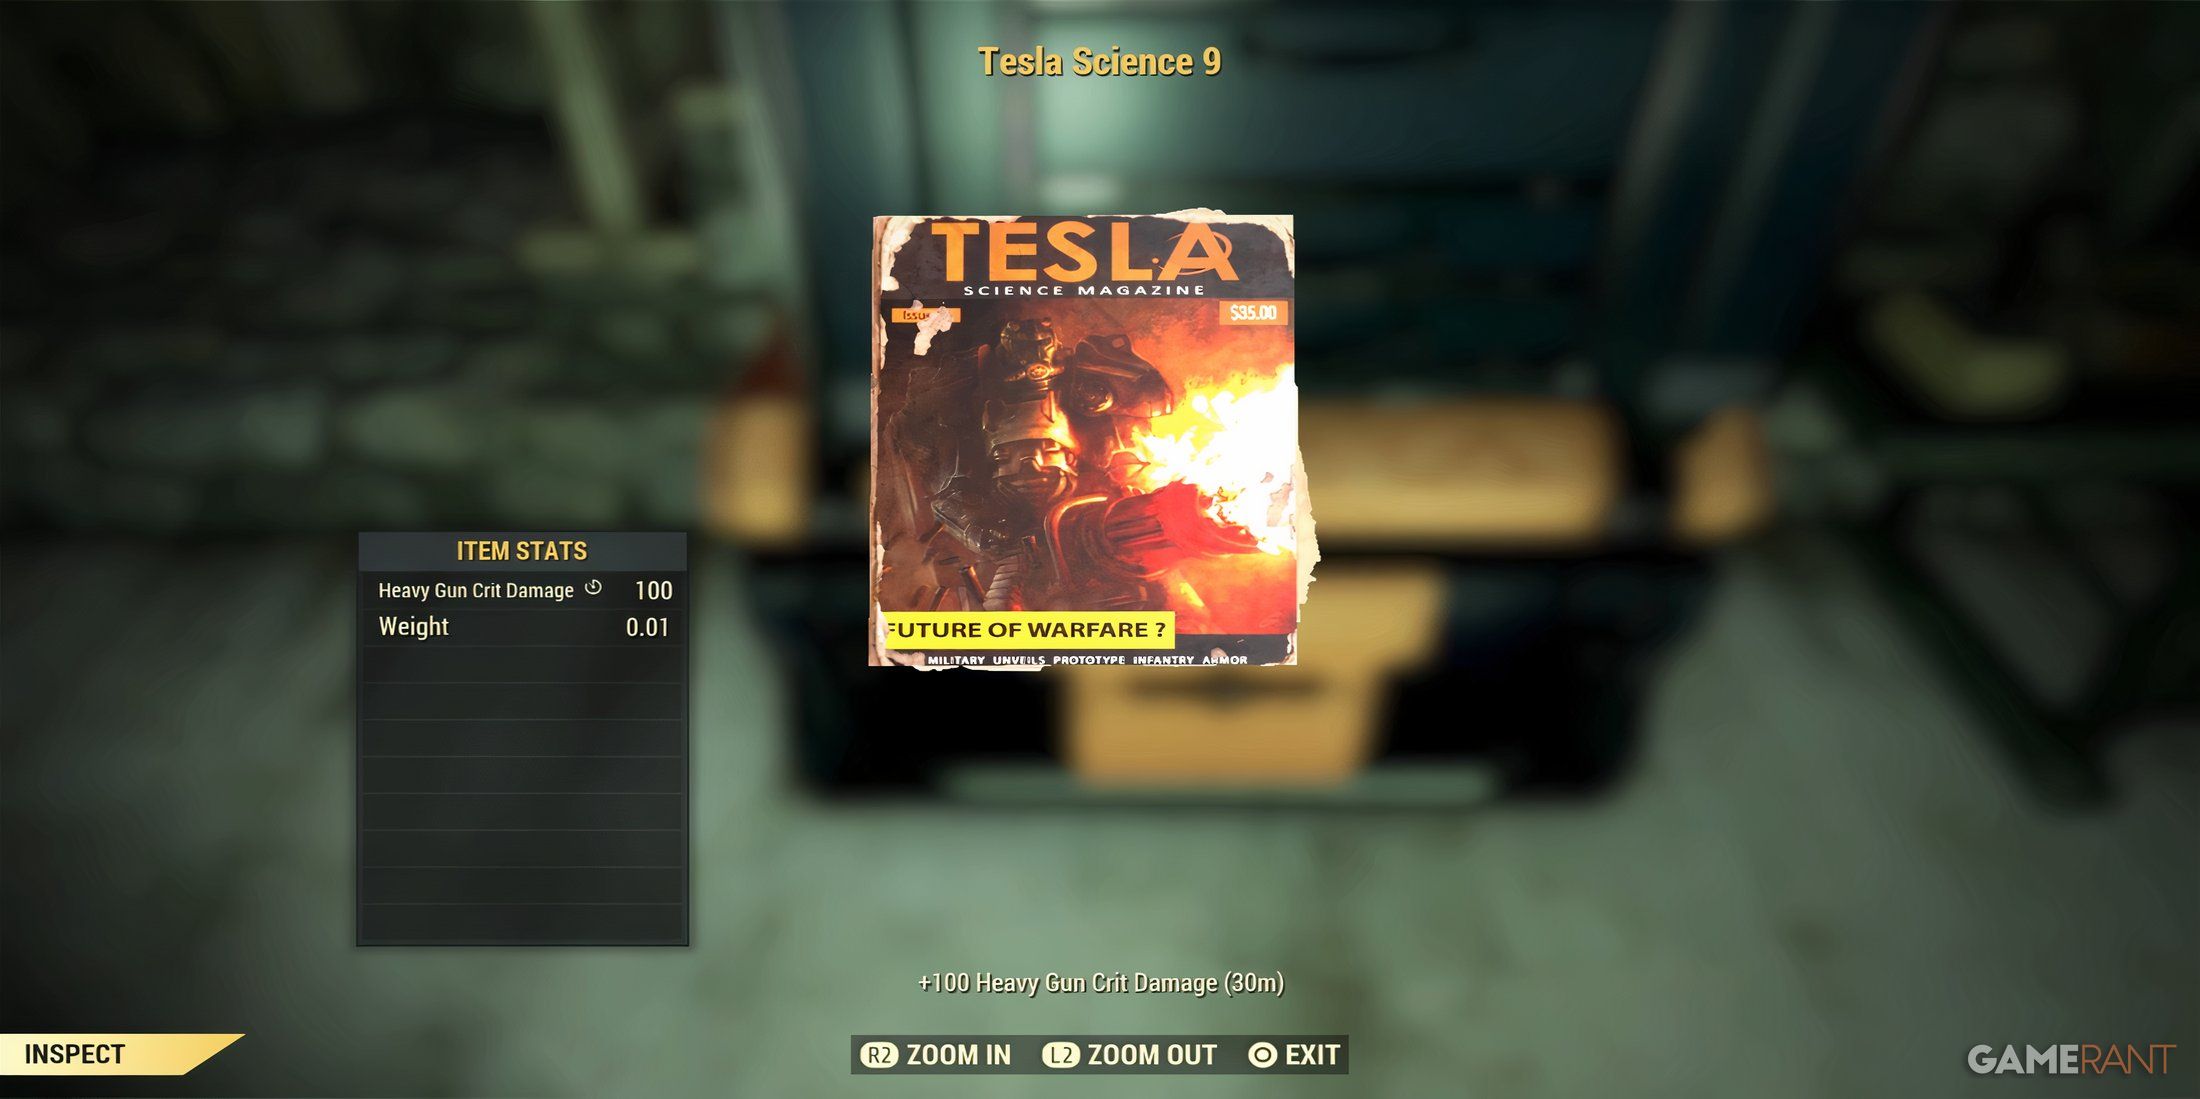 Tesla Science 9 Magazine in Fallout 76